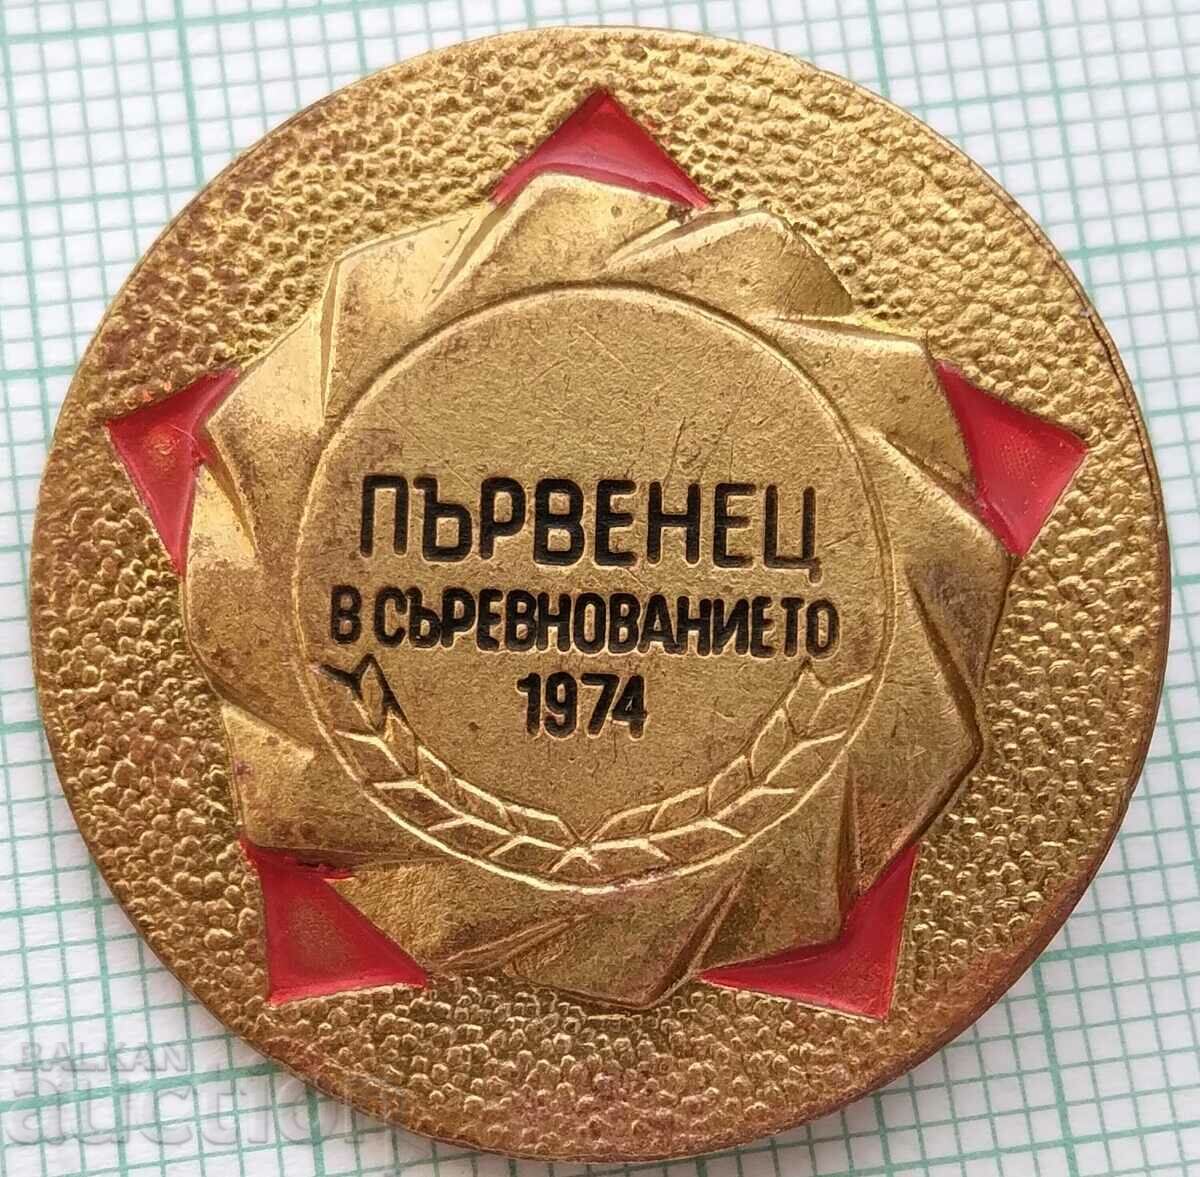 15367 Badge - Winner in the 1974 competition.